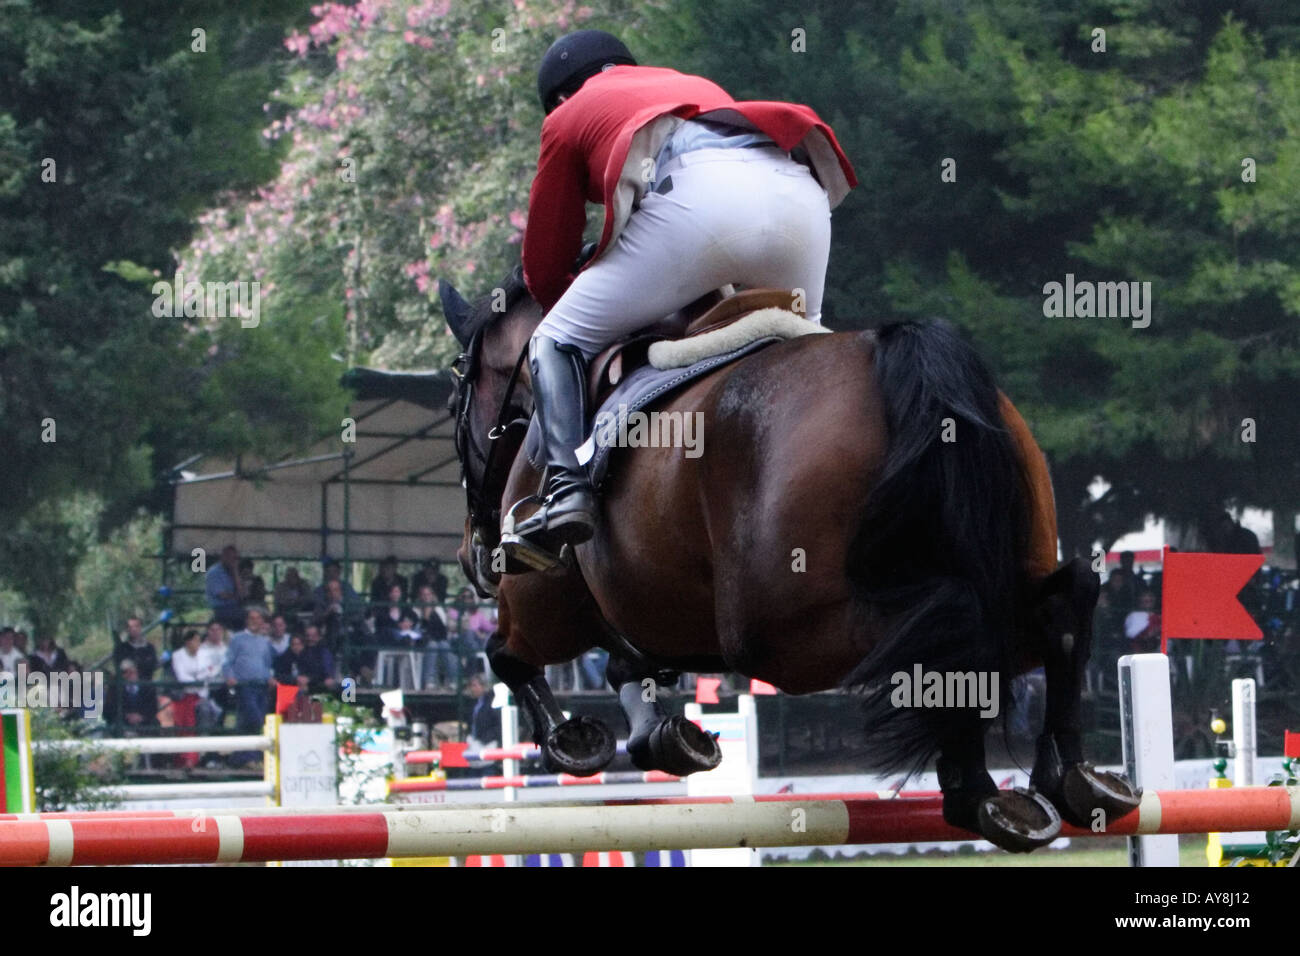 horse and rider jumping over obstacle during equestrian competition Stock Photo